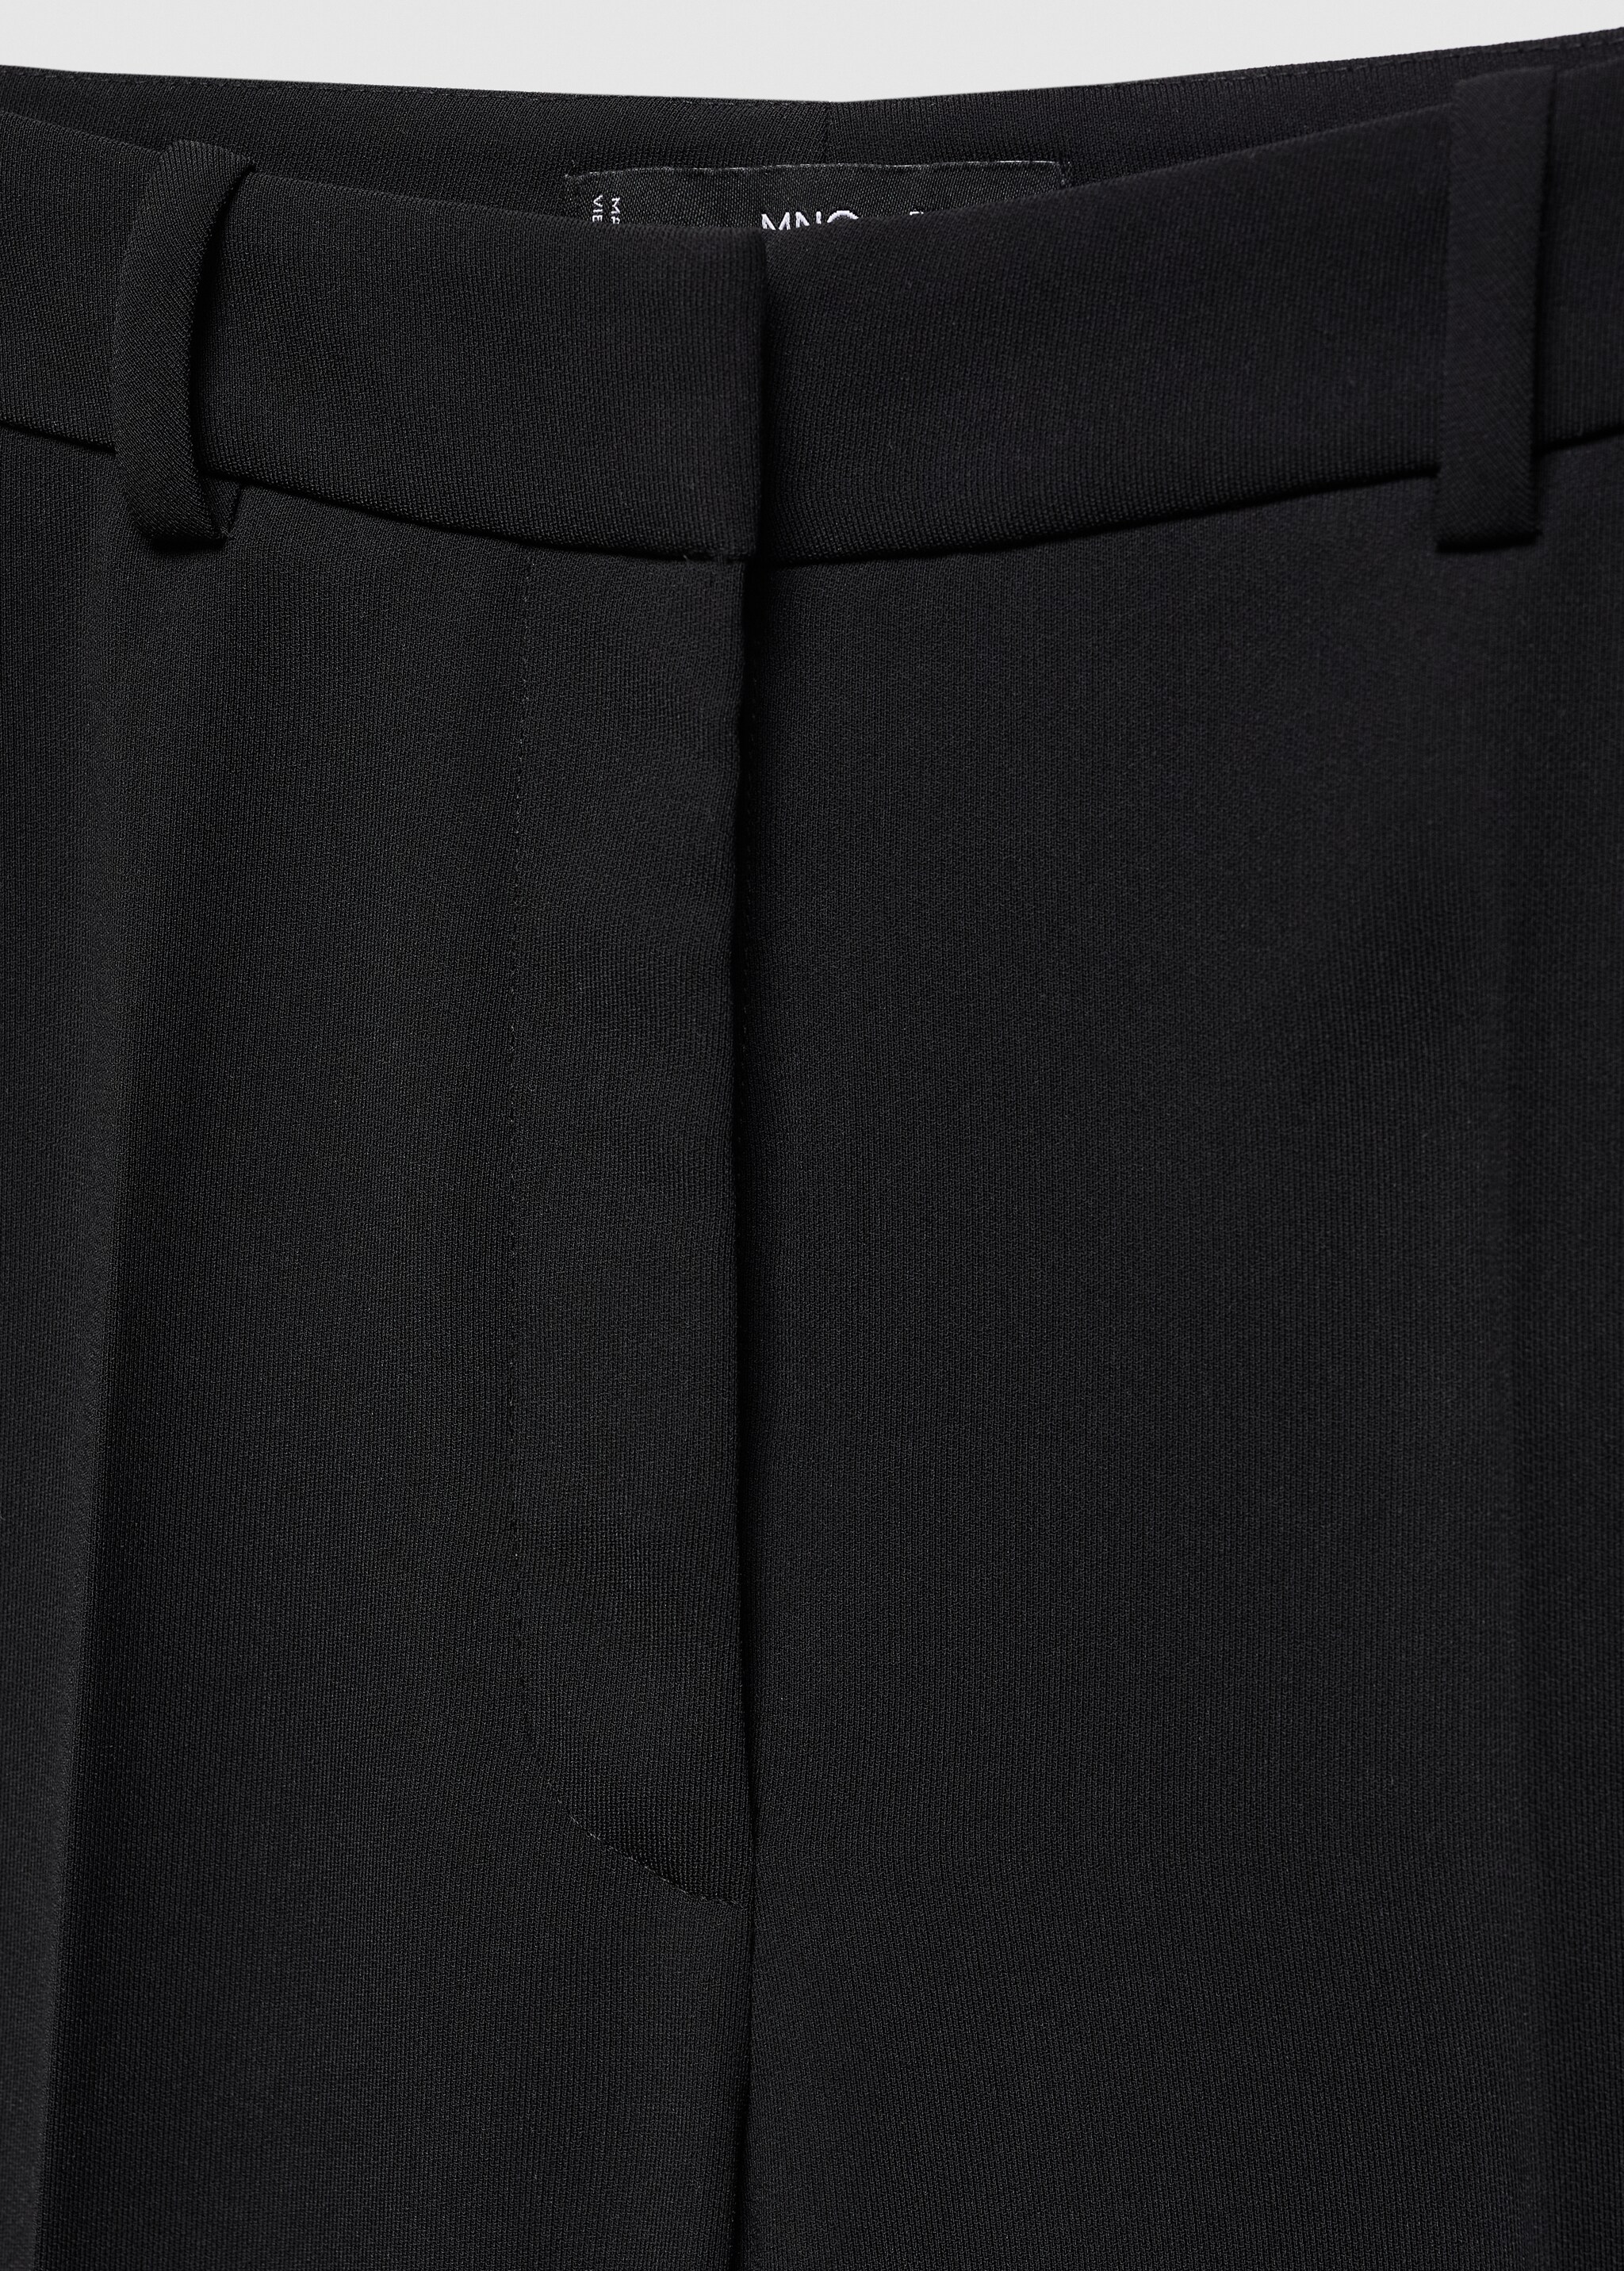 Flared trouser suit - Details of the article 8